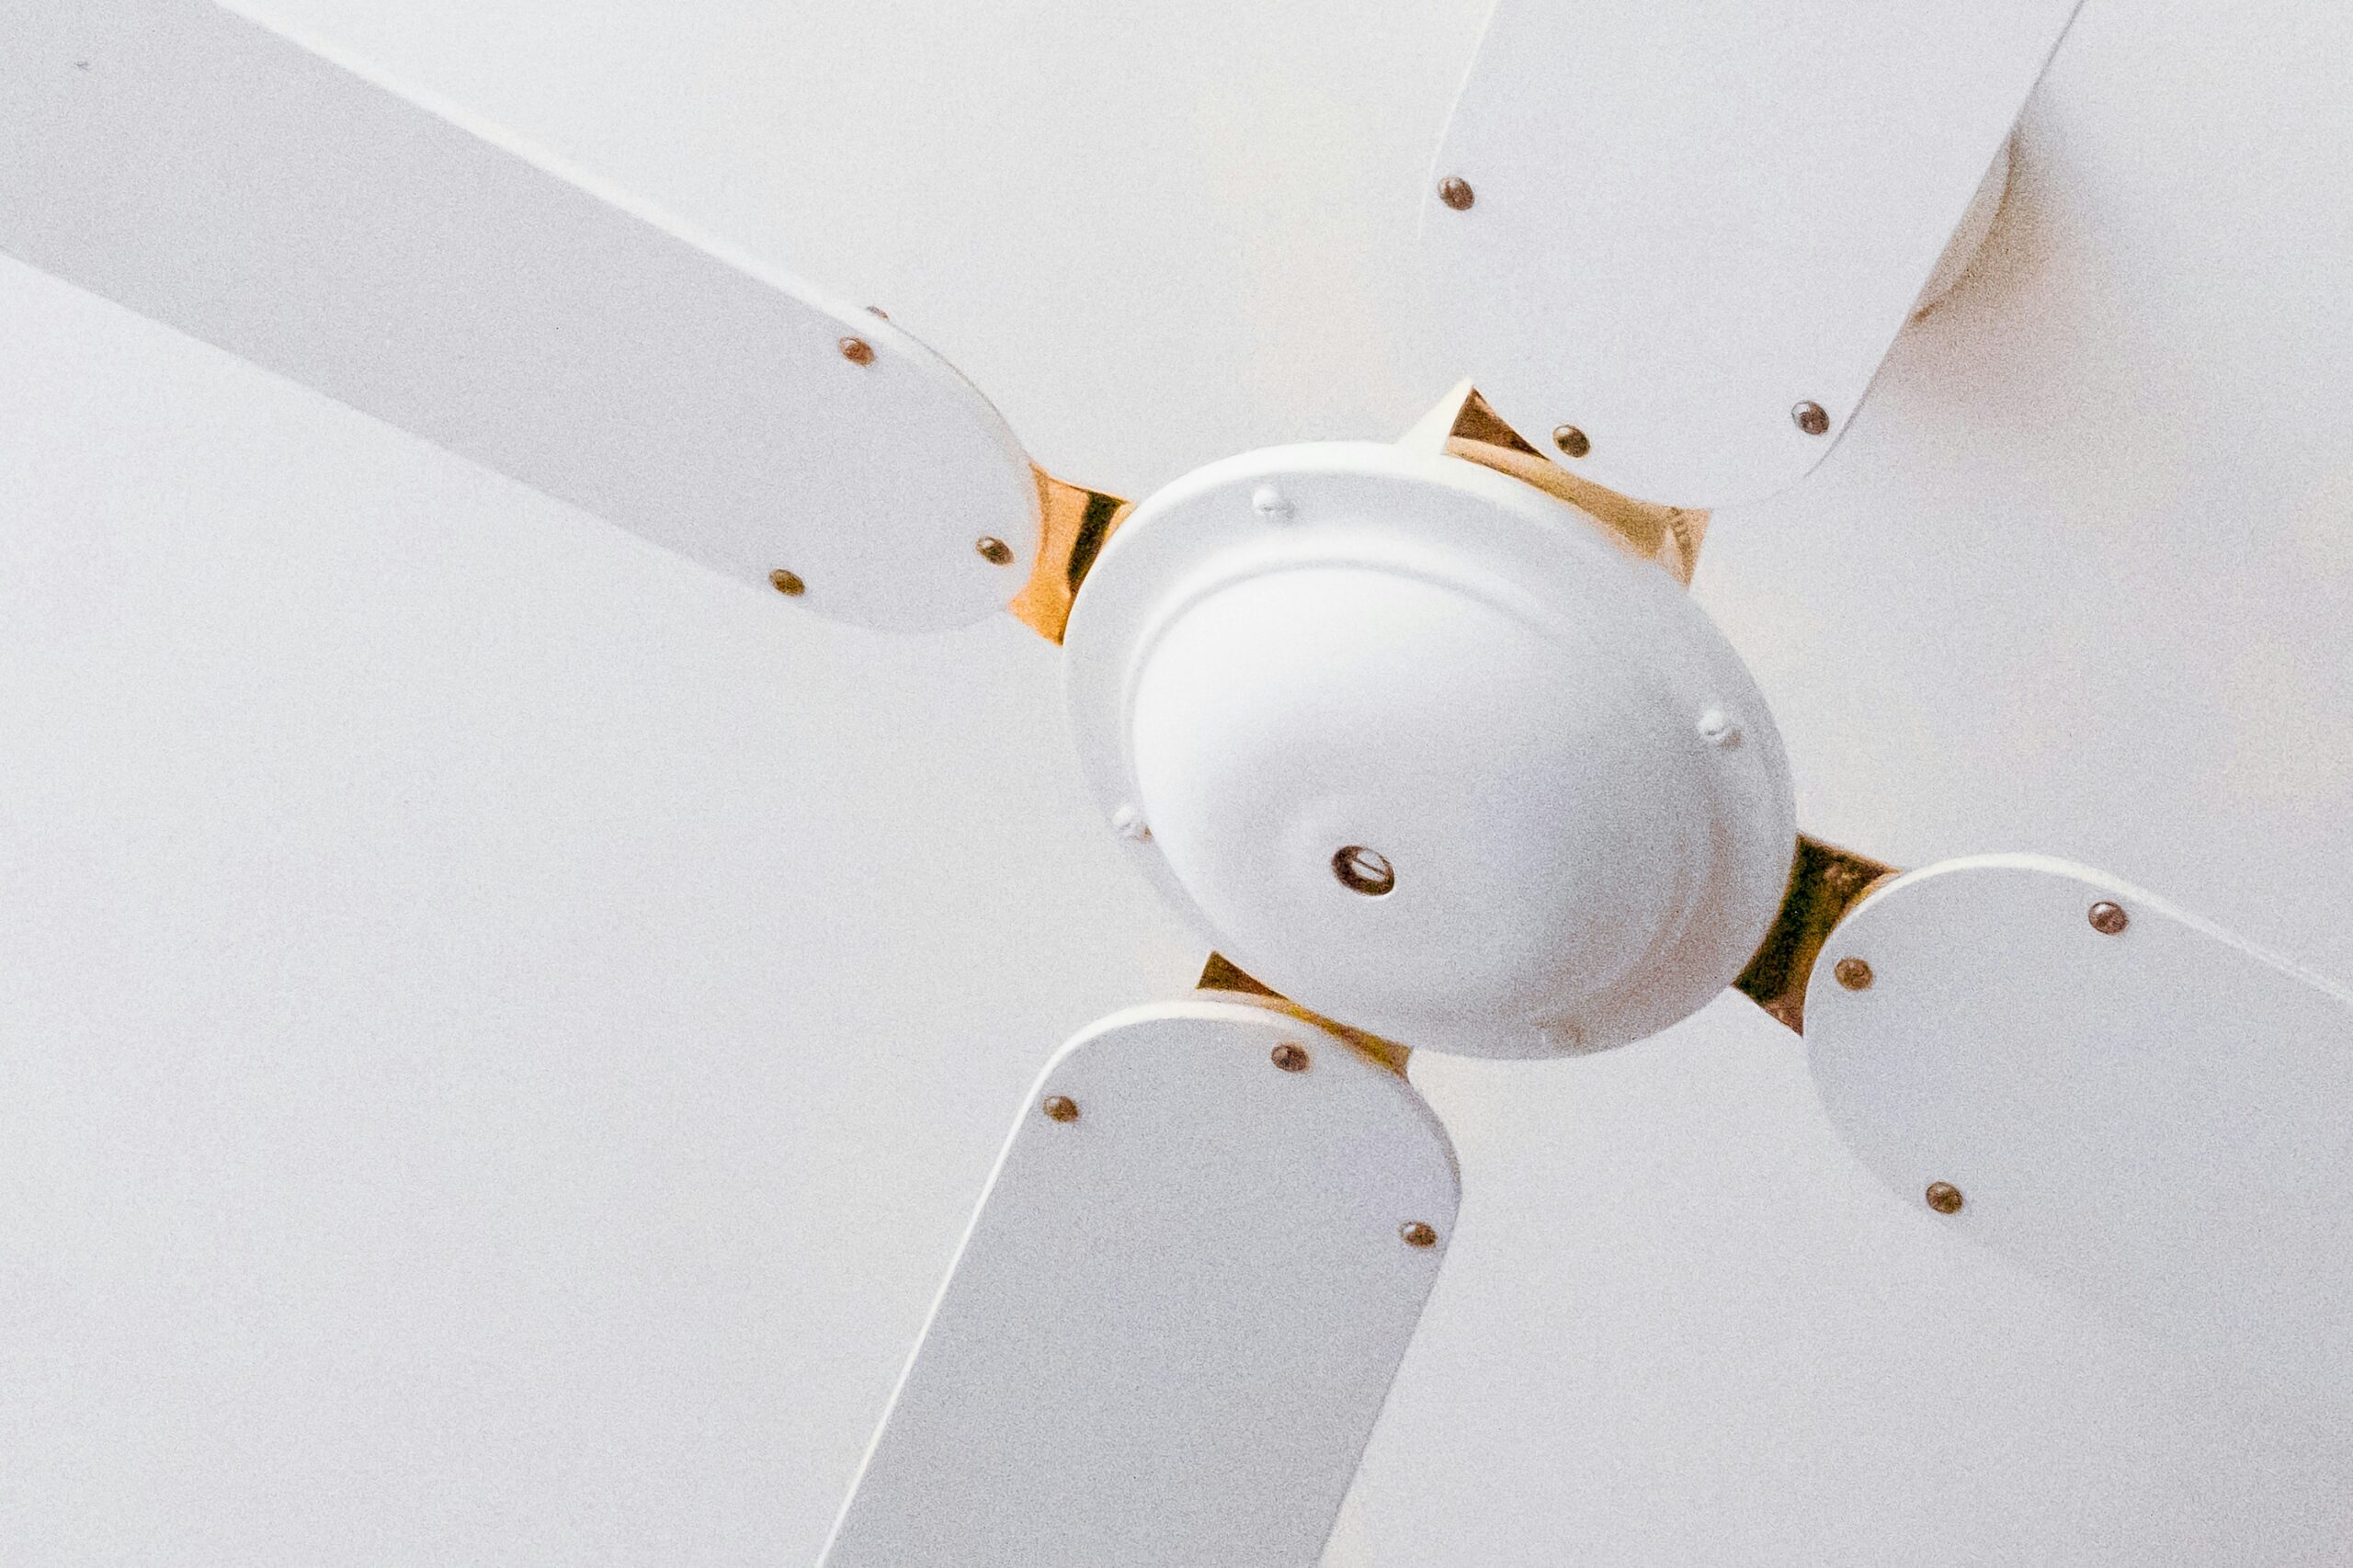 A close up shot of a ceiling fan